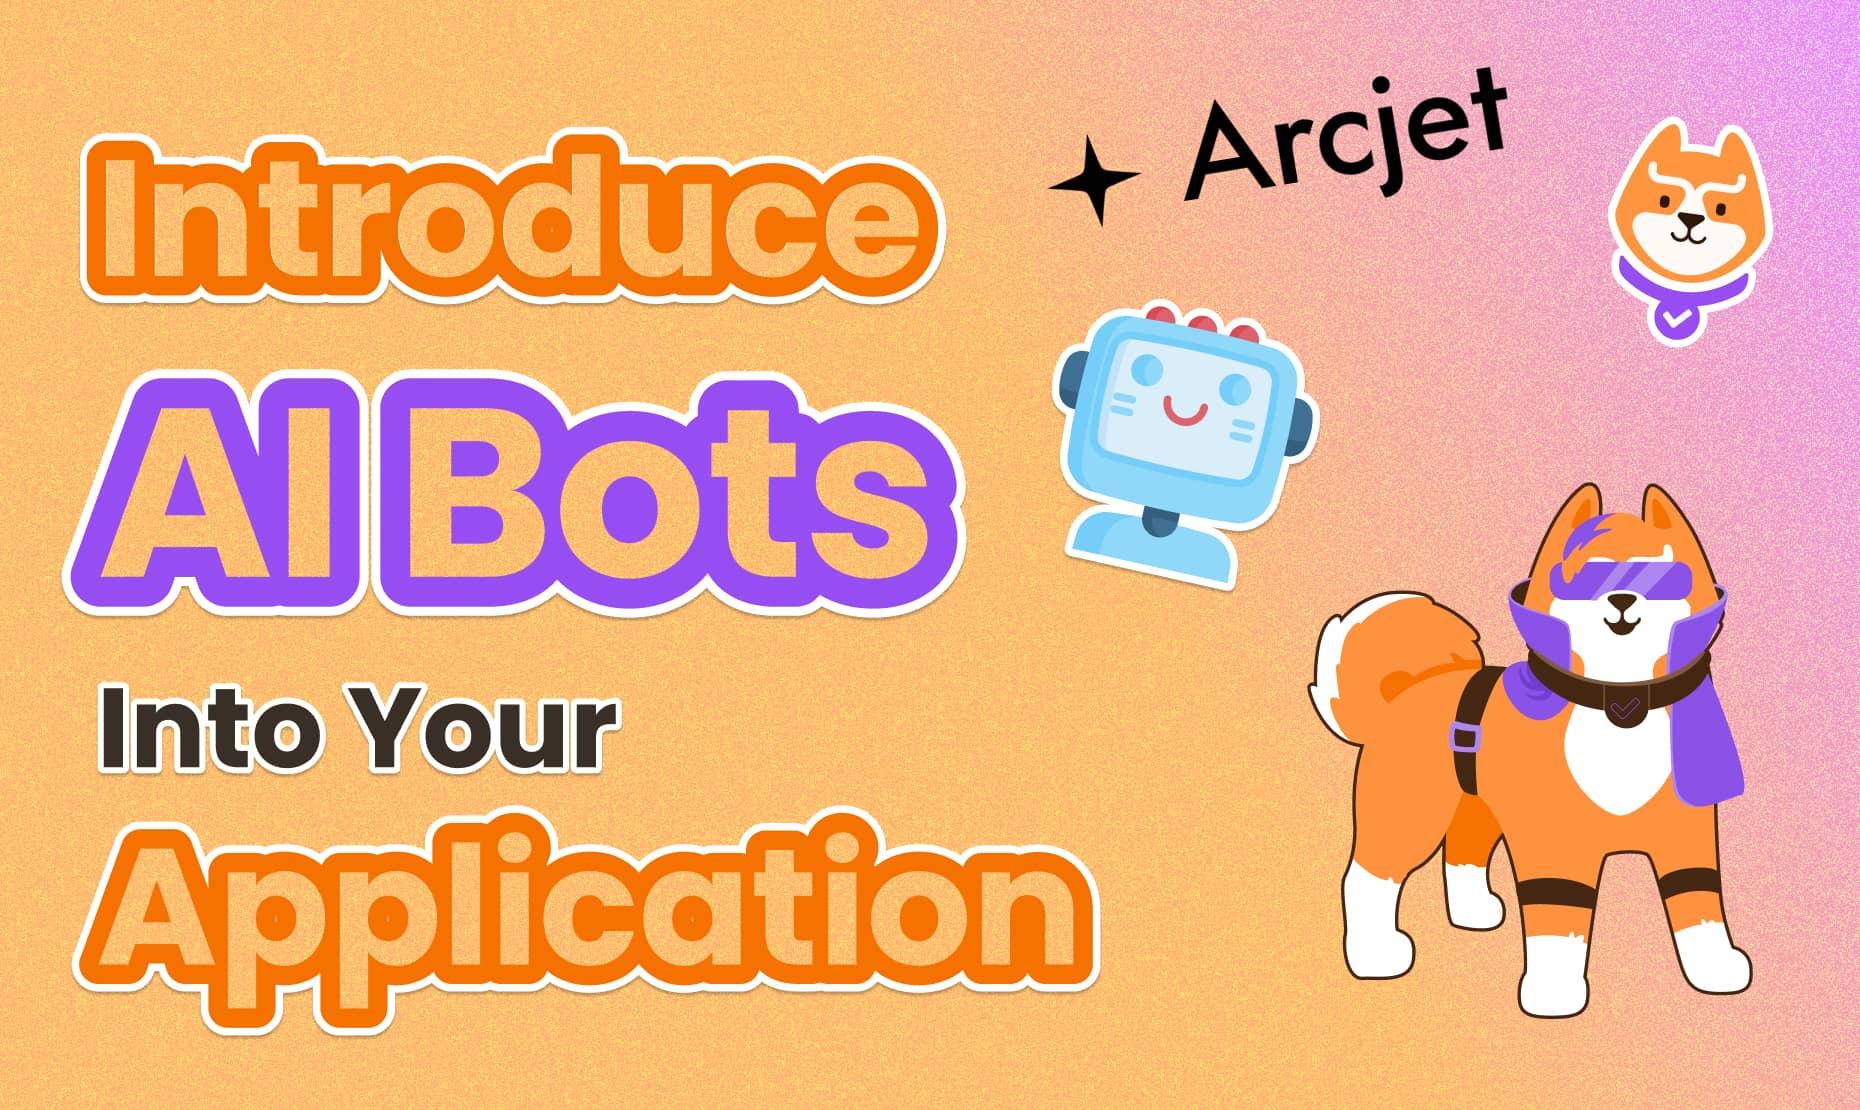 How to Protect Your Application from AI Bots